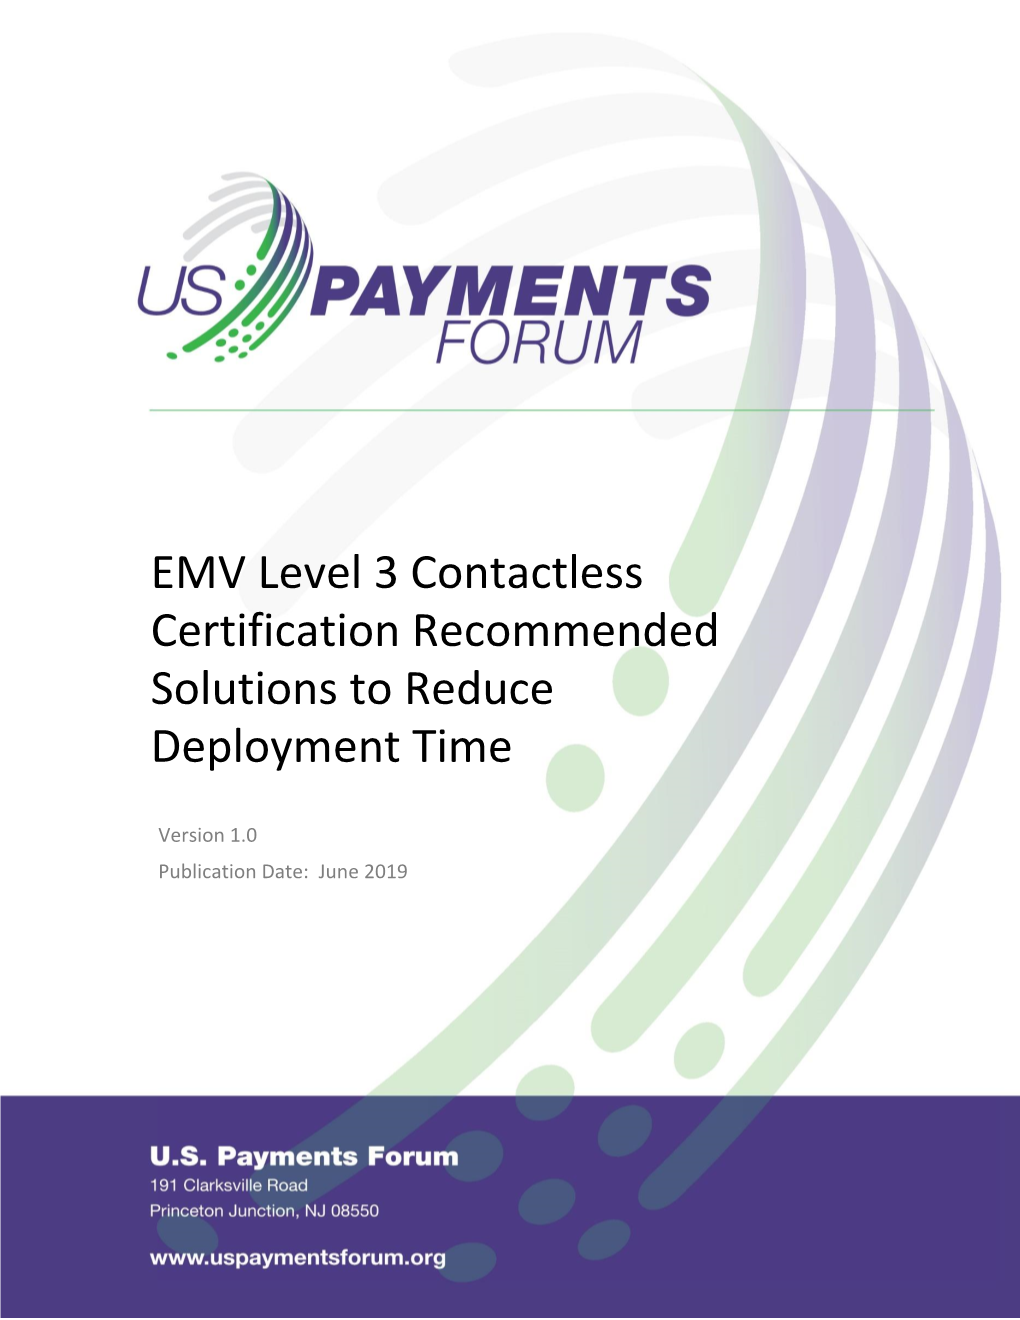 EMV Level 3 Contactless Certification Recommended Solutions to Reduce Deployment Time